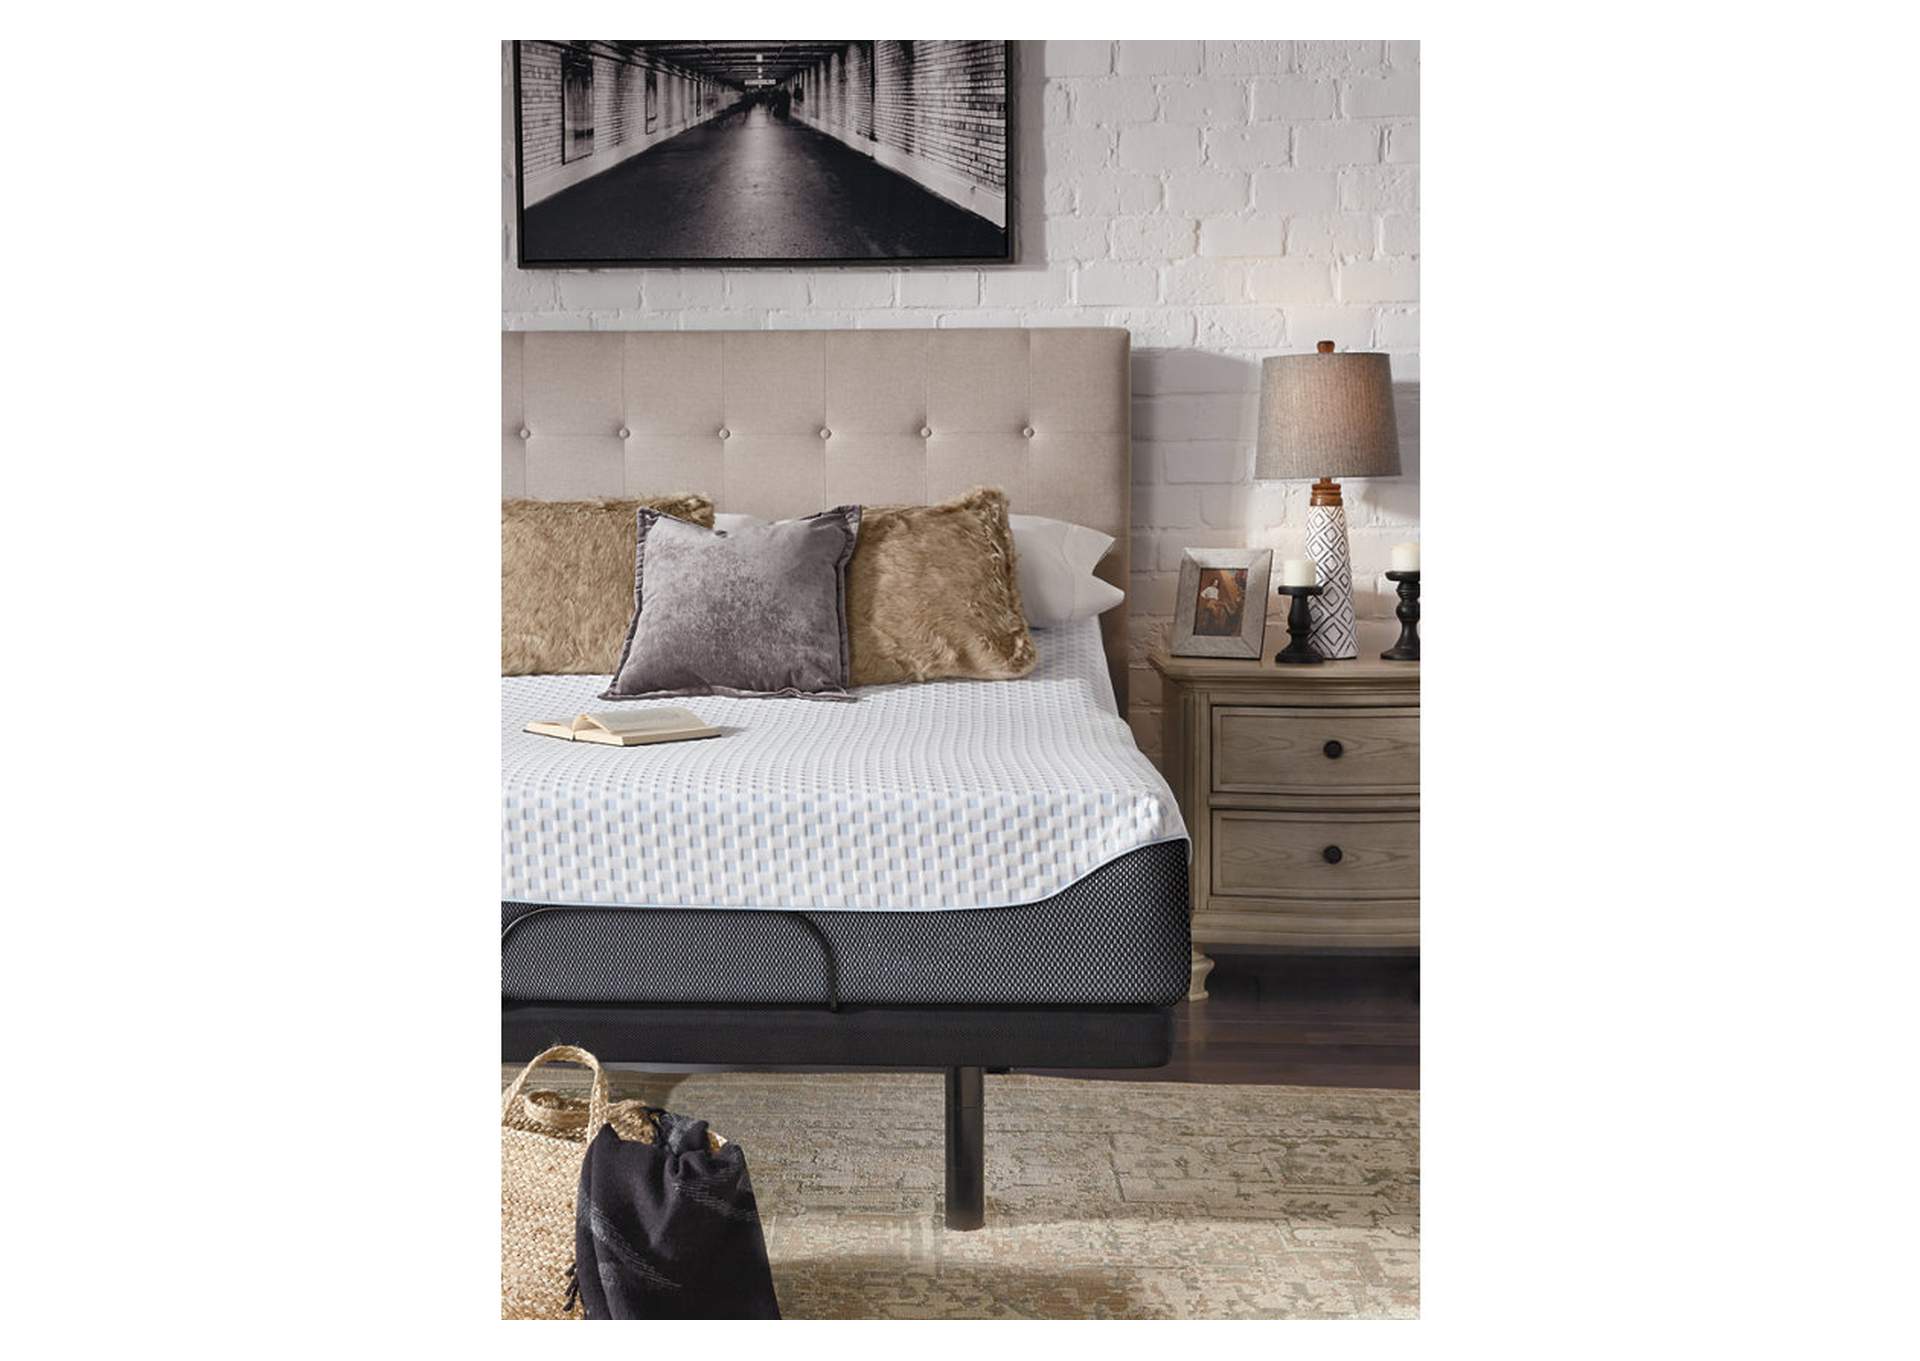 12 Inch Chime Elite Queen Adjustable Base with Foundation,Sierra Sleep by Ashley